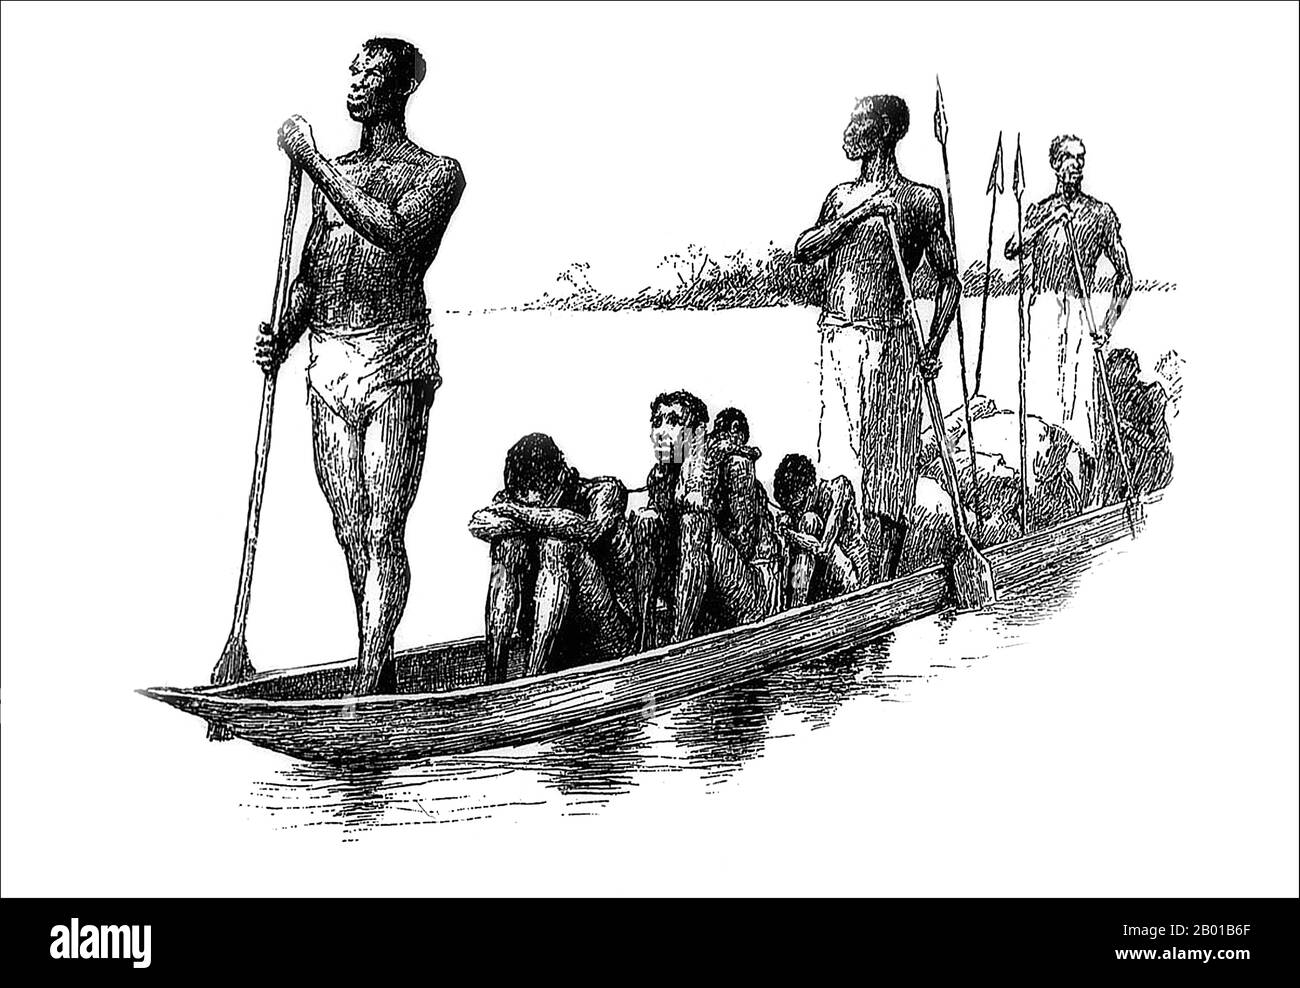 Central Africa: Captured slaves being transported across a river by canoe. Illustration by Edward Winsor Kemble (18 January 1861 - 19 September 1933), 1880s.  Black slaves were imported into the Muslim world from Africa by a number of routes northward across the Sahara desert, and by sea into Arabia and the Persian Gulf. Estimates of the number involved vary greatly but it seems that there may easily have been 10 million, perhaps even twice that number.  Two-thirds of African slaves were female. The males were considered to be troublesome. Stock Photo